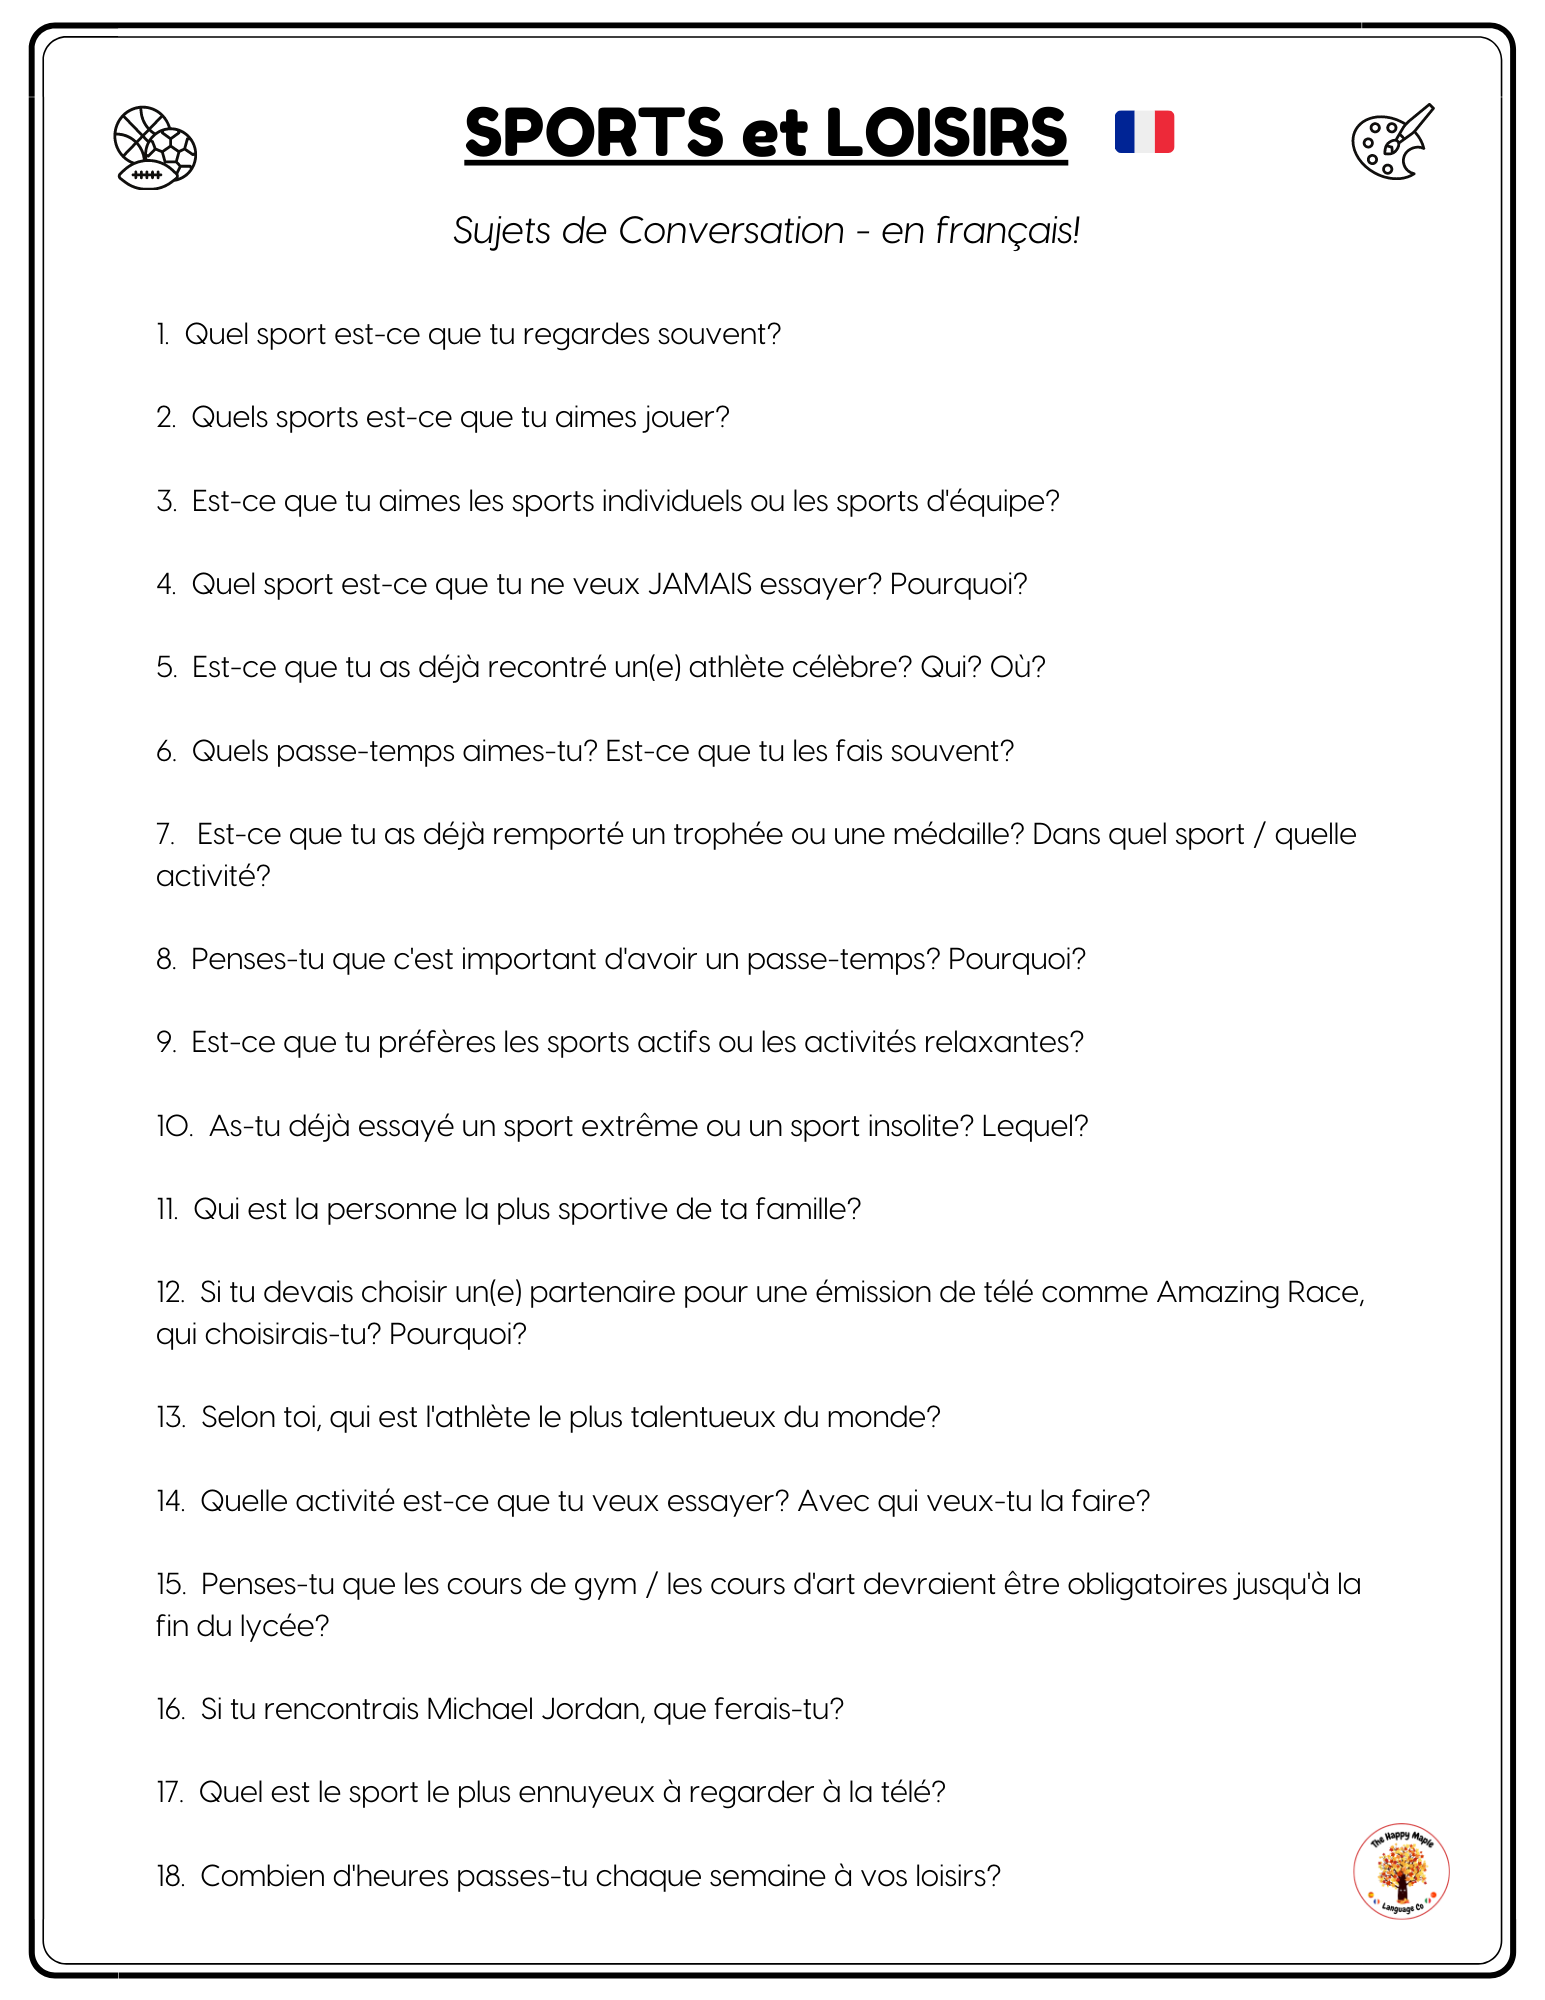 French Conversation Questions Sports et Loisirs Free Printable Download